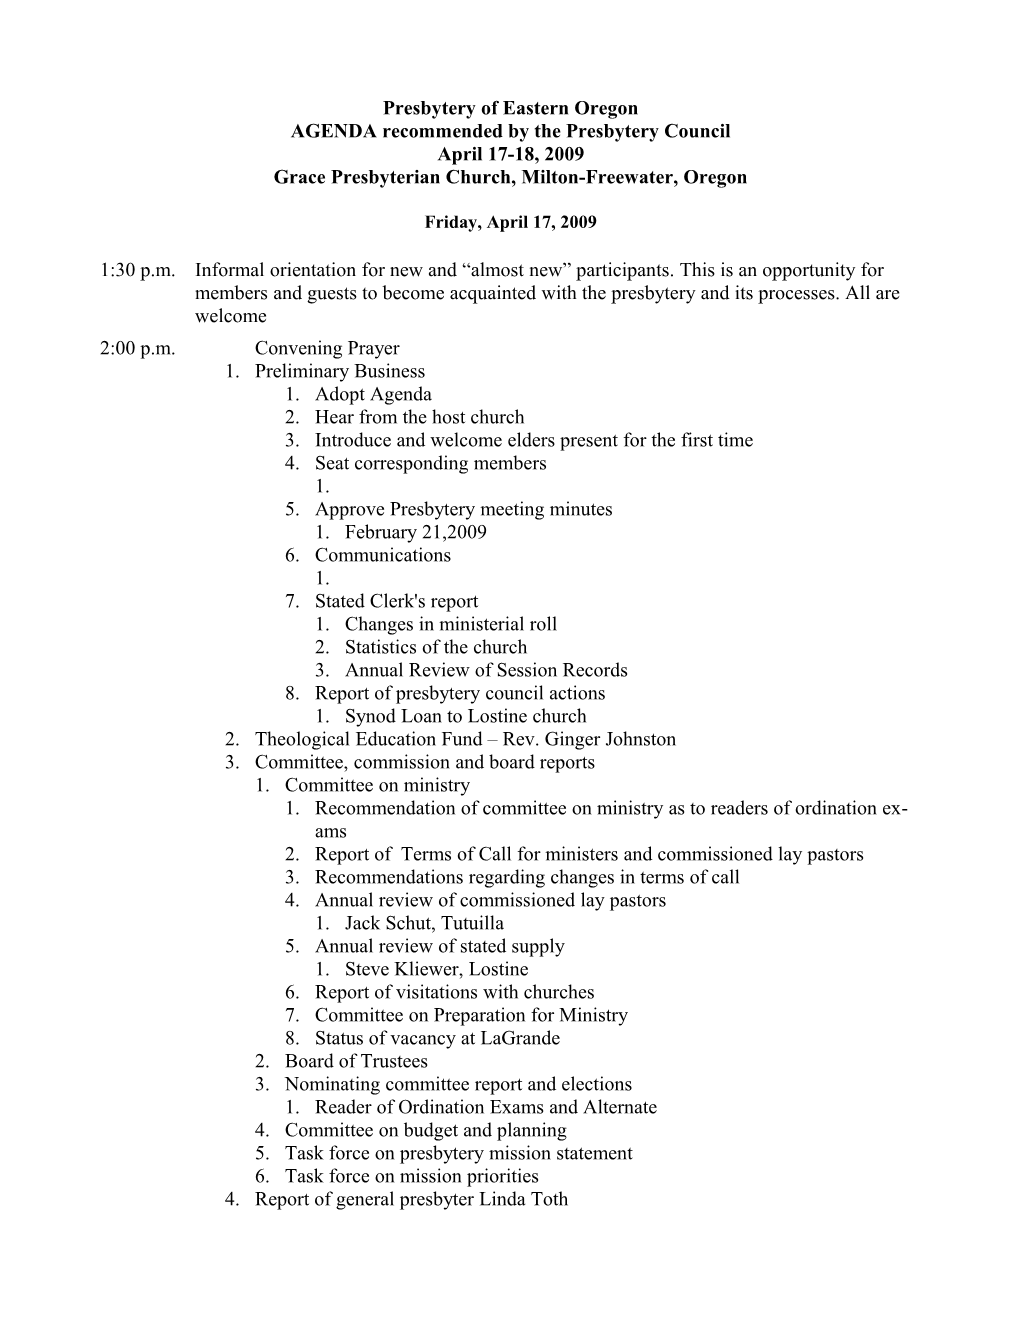 AGENDA Recommended by the Presbytery Council